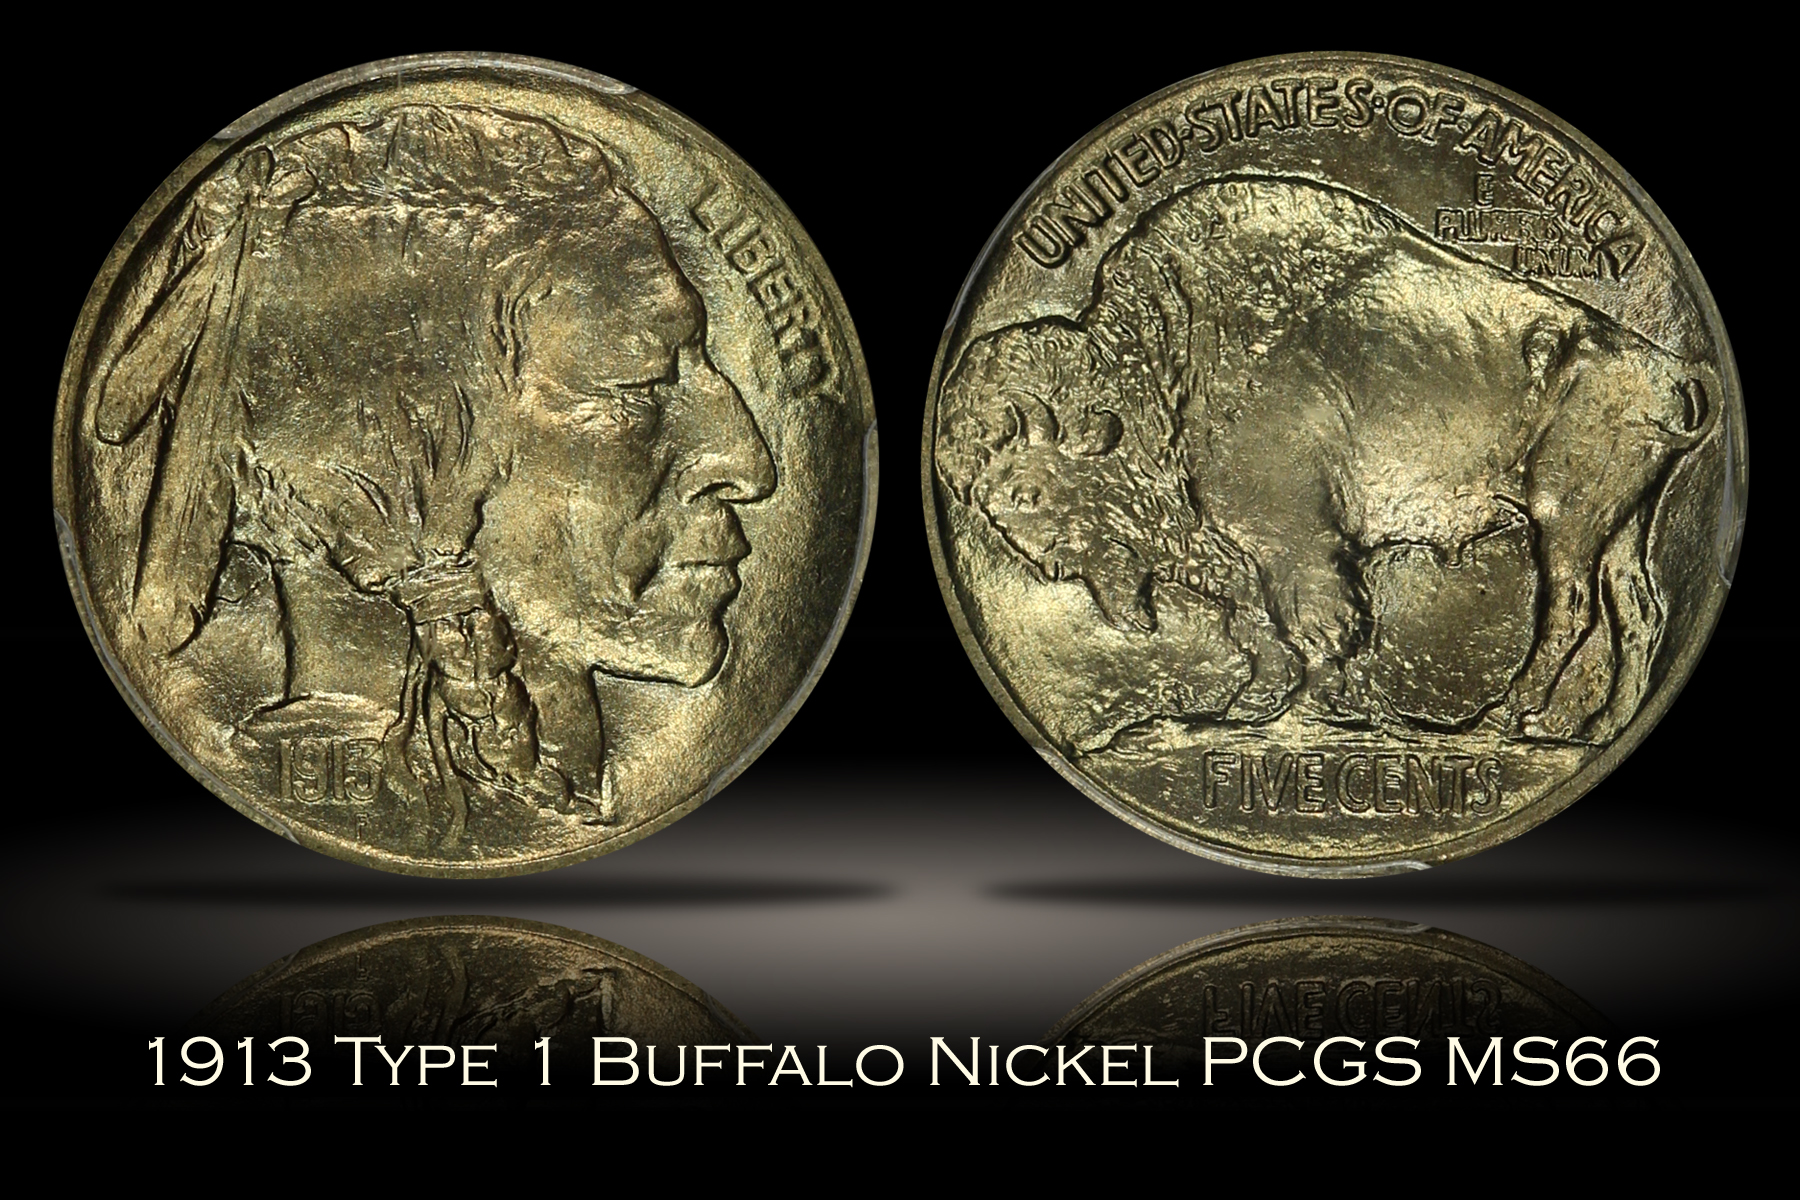 Michael Kittle Rare Coins 1913 Type One Buffalo Nickel Pcgs Ms66